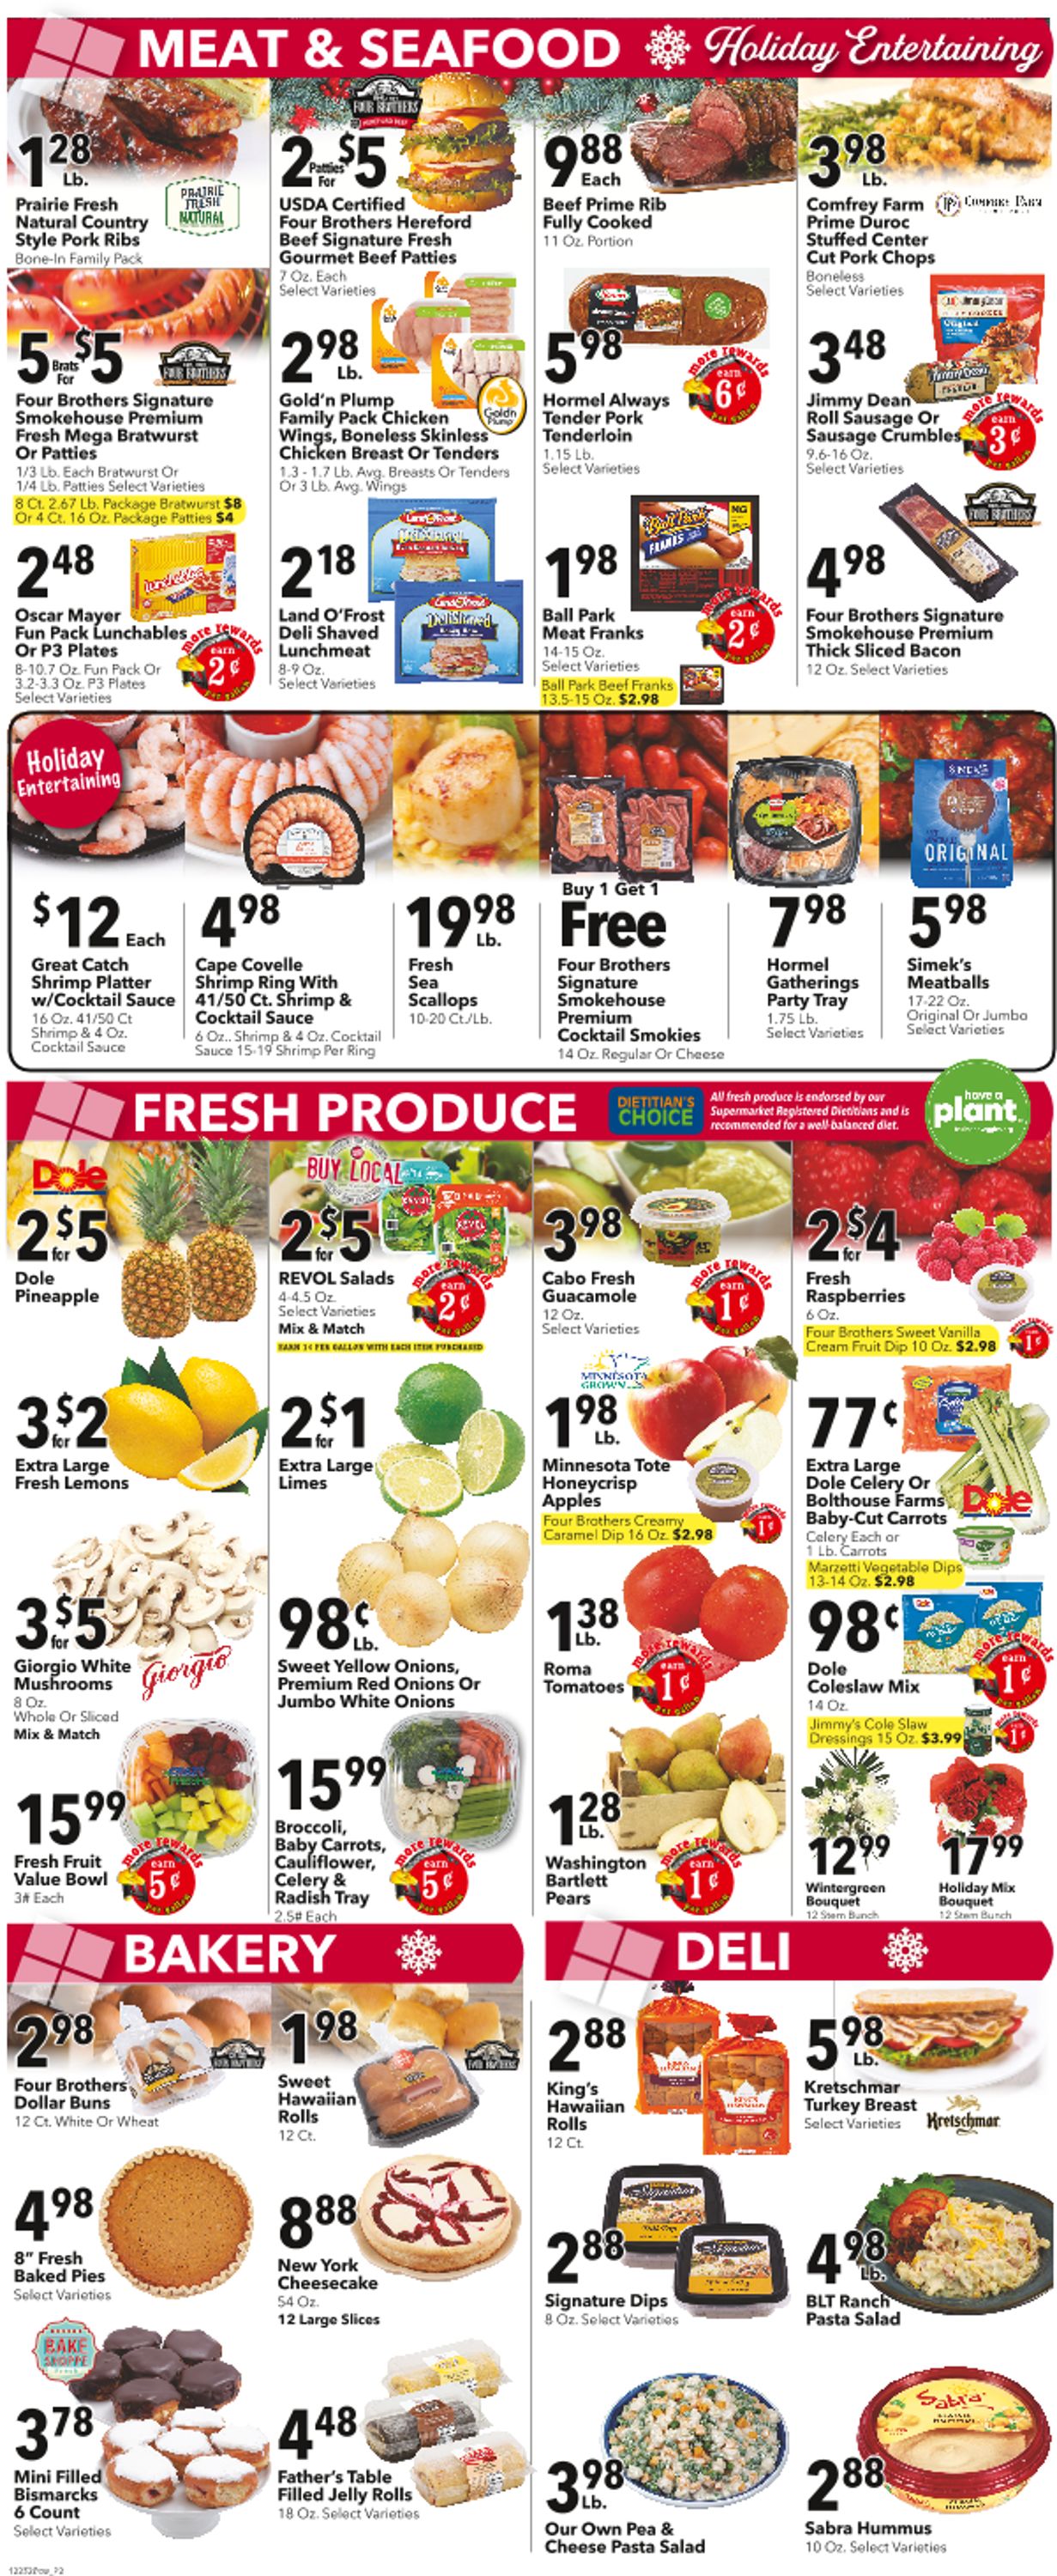 Cash Wise Christmas 2020 Weekly Ad Circular - valid 12/23-12/29/2020 (Page 2)